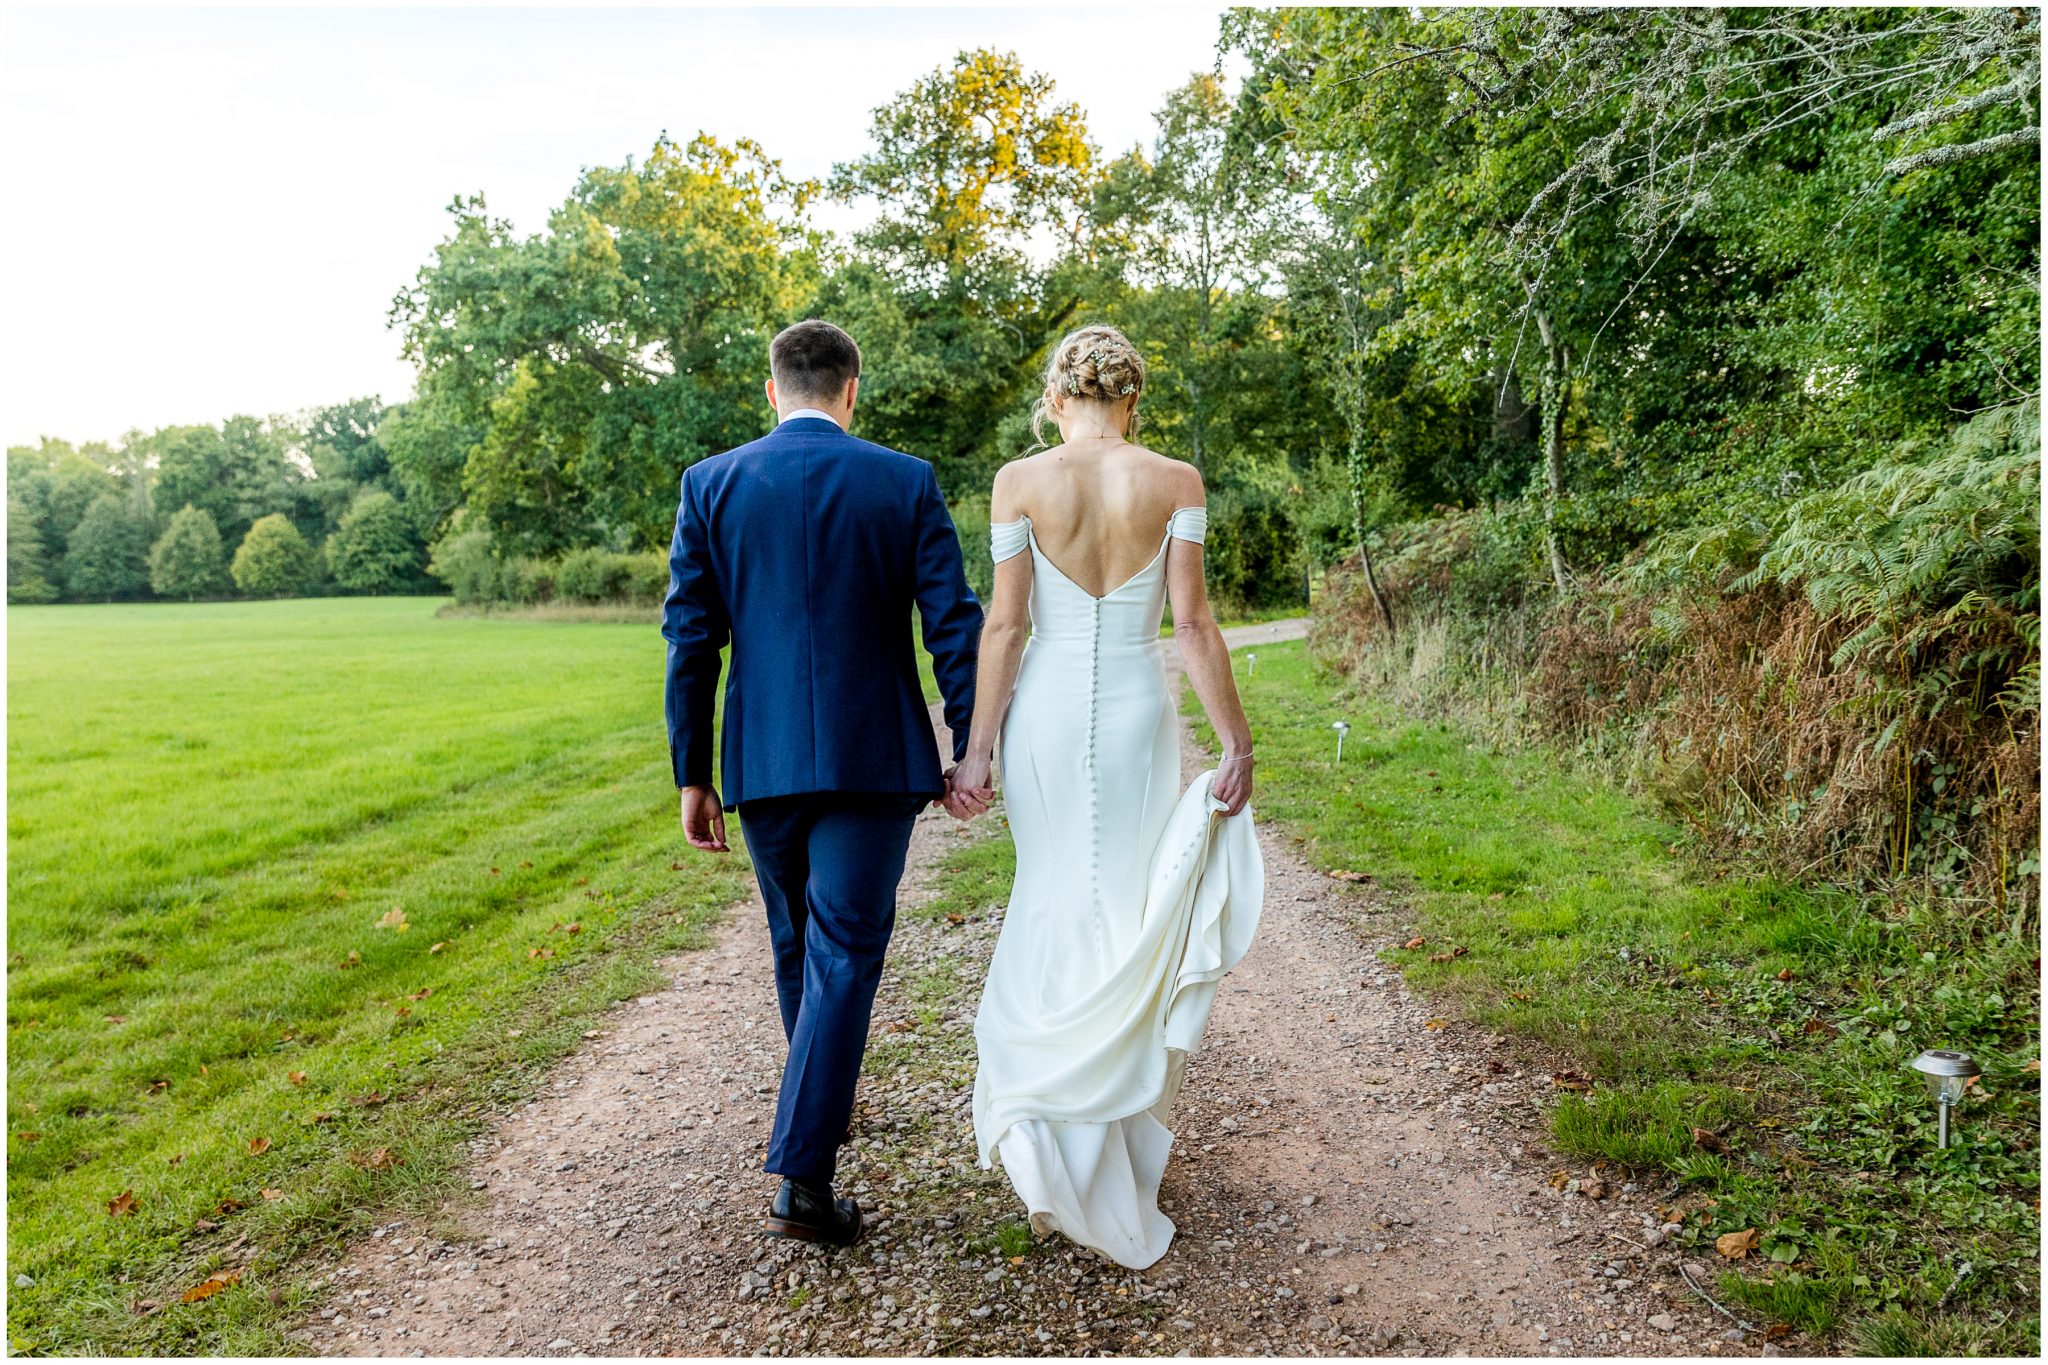 Bride and groom walk down a country track in the middle of the estate